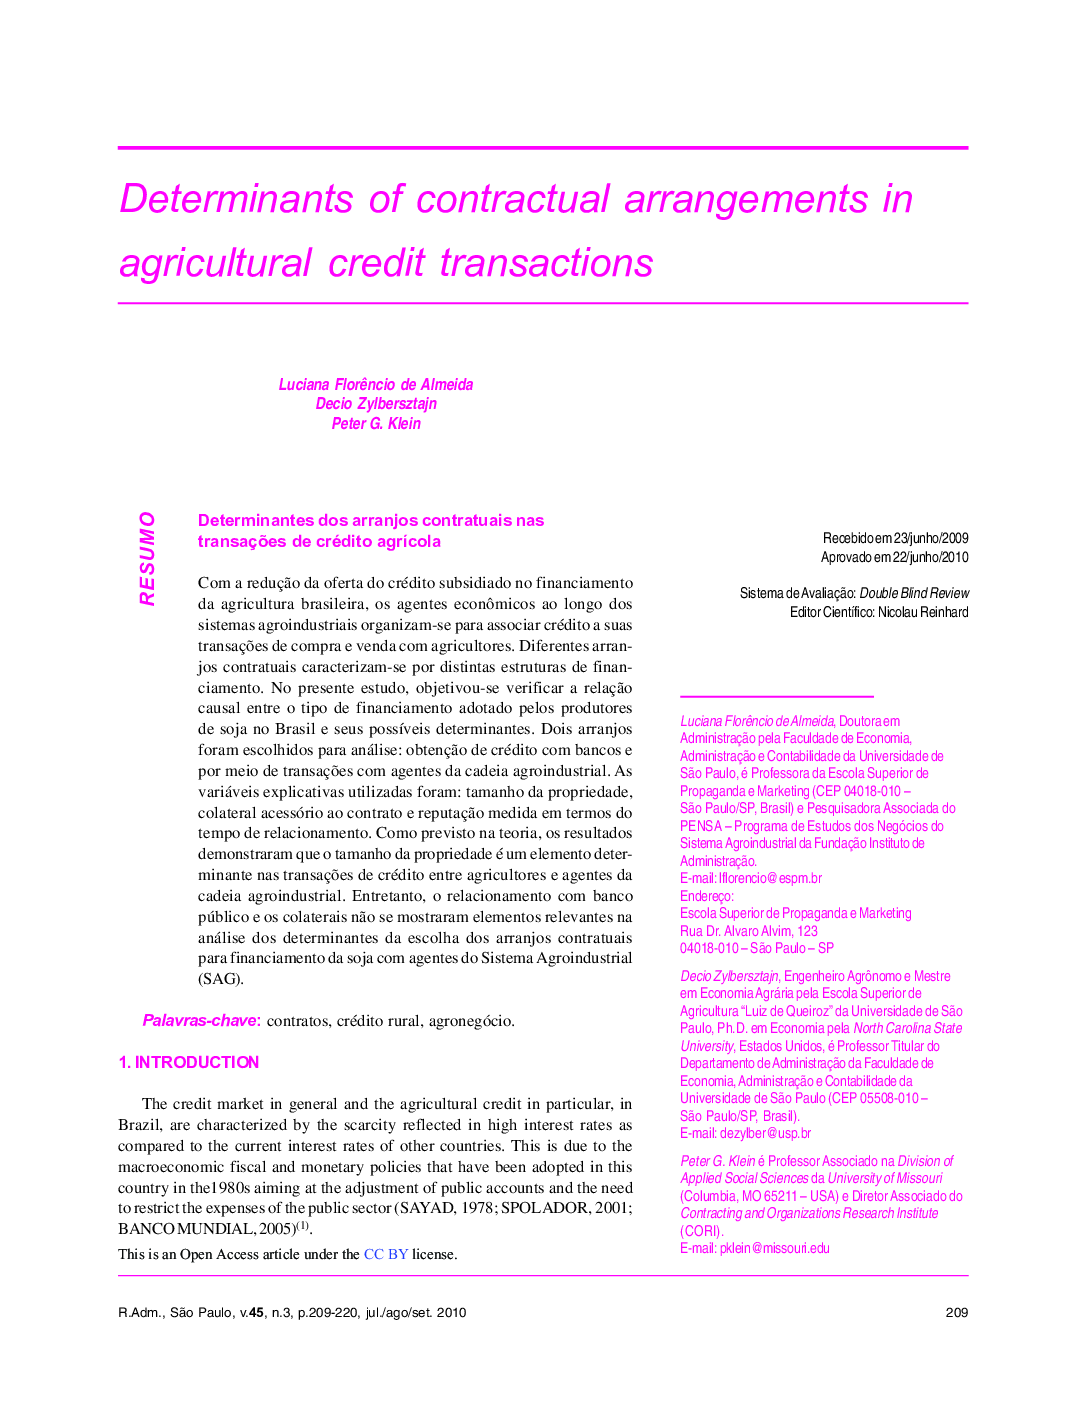 Determinants of contractual arrangements in agricultural credit transactions